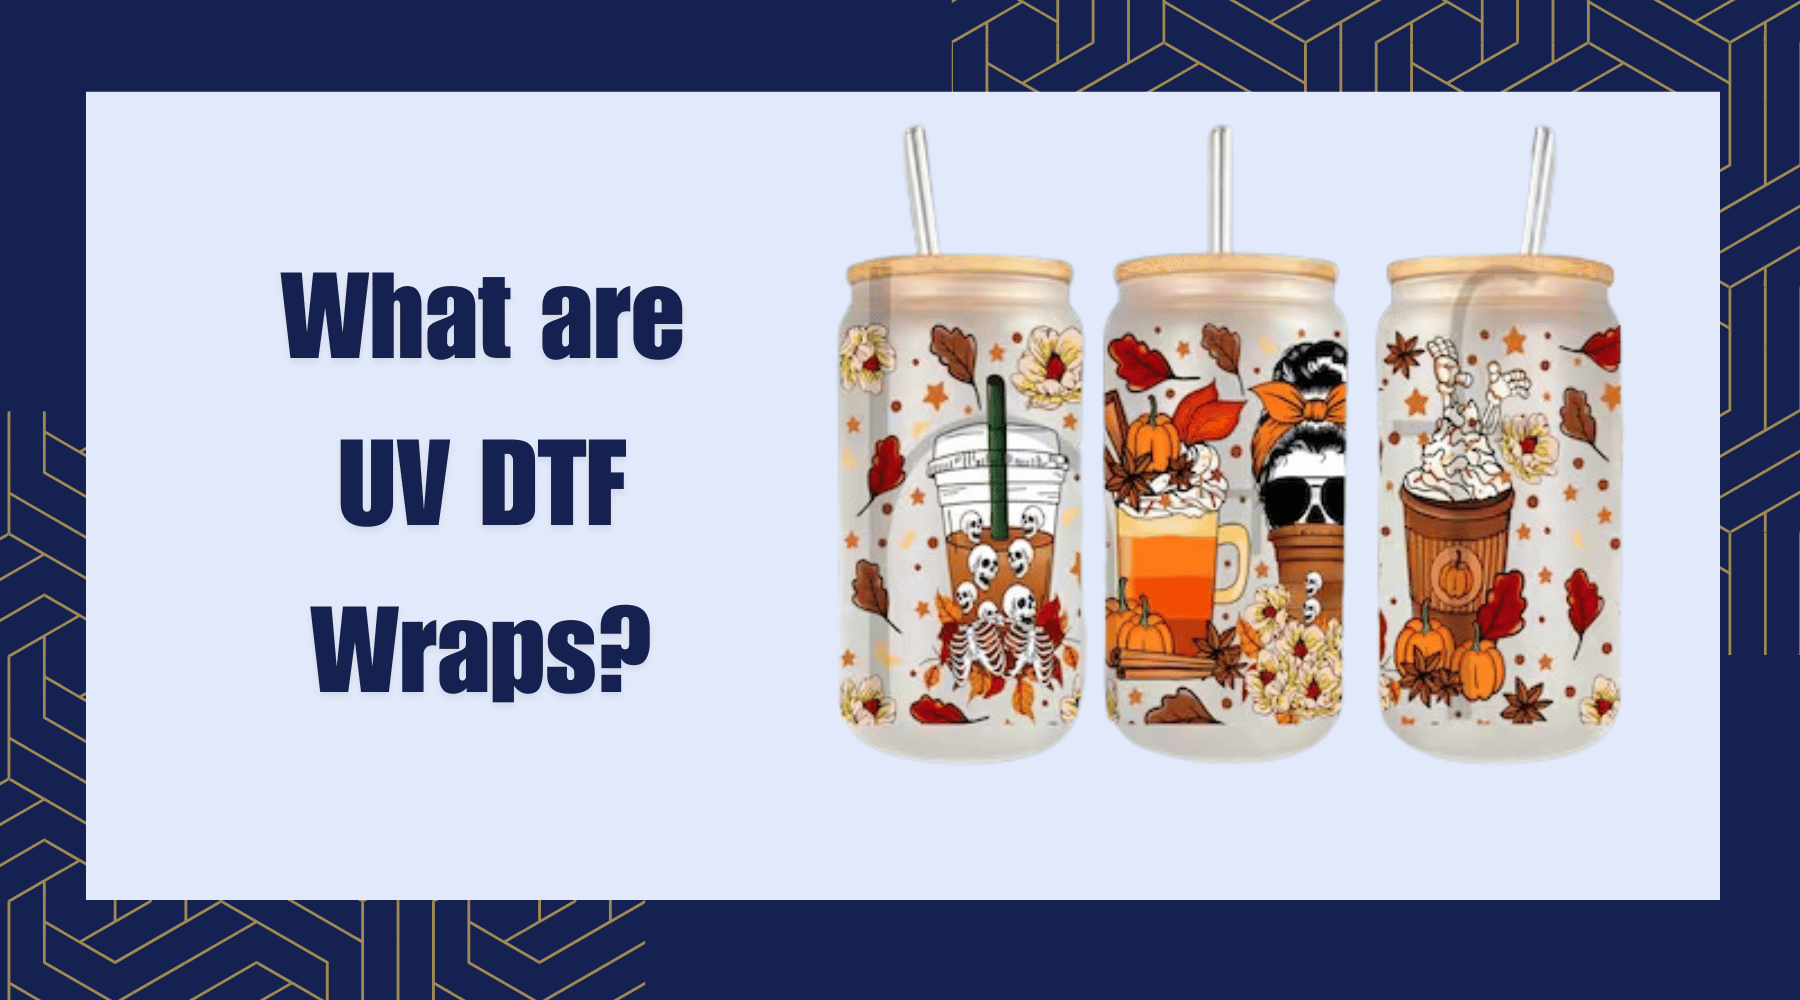 What are UV DTF Wraps